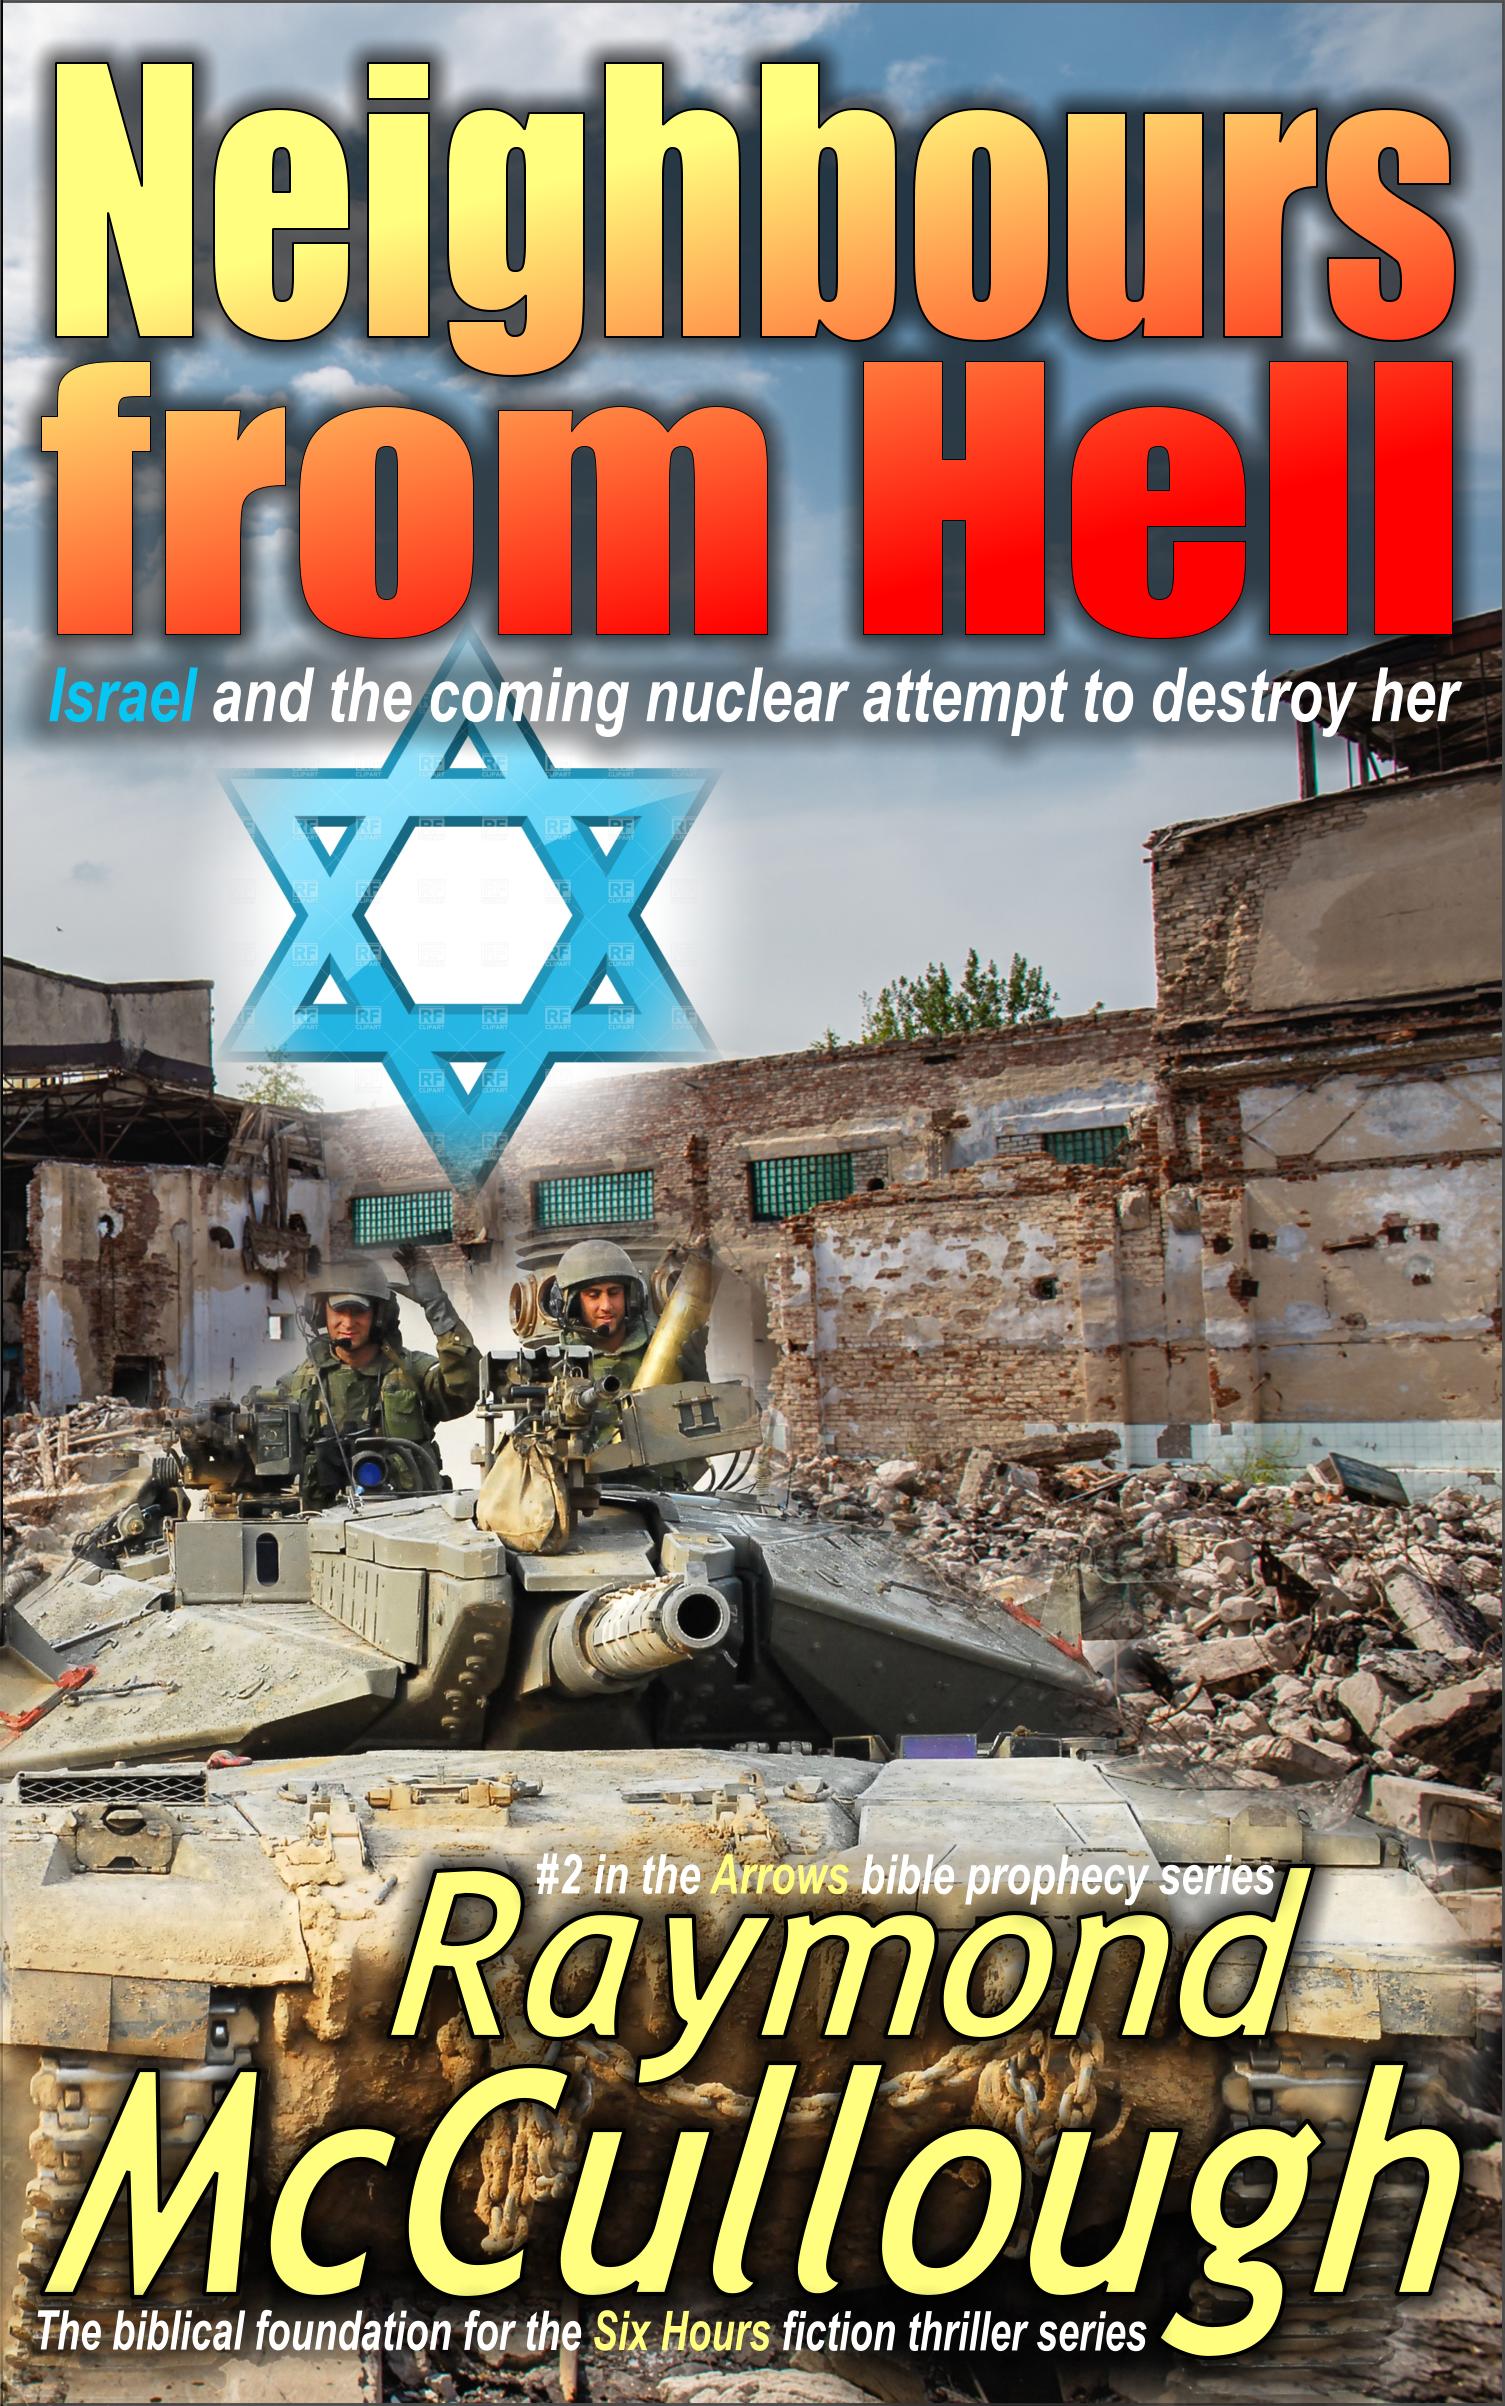 Book: 'Neighbours from Hell' –  Israel and the coming nuclear attempt to destroy her